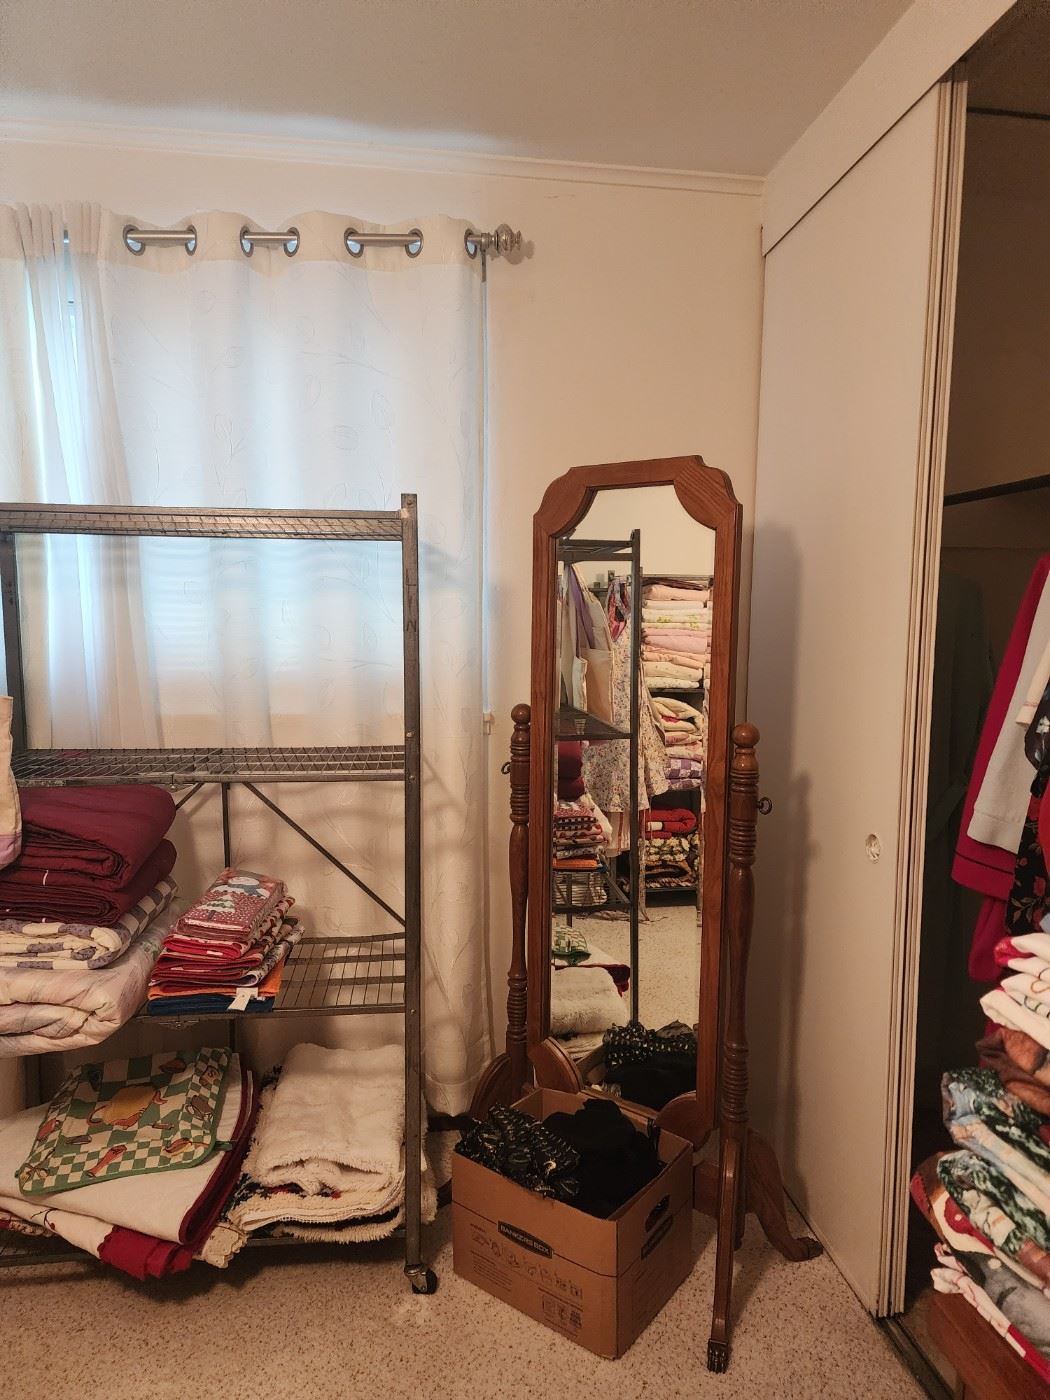 Stand alone mirror
Handmade quilts